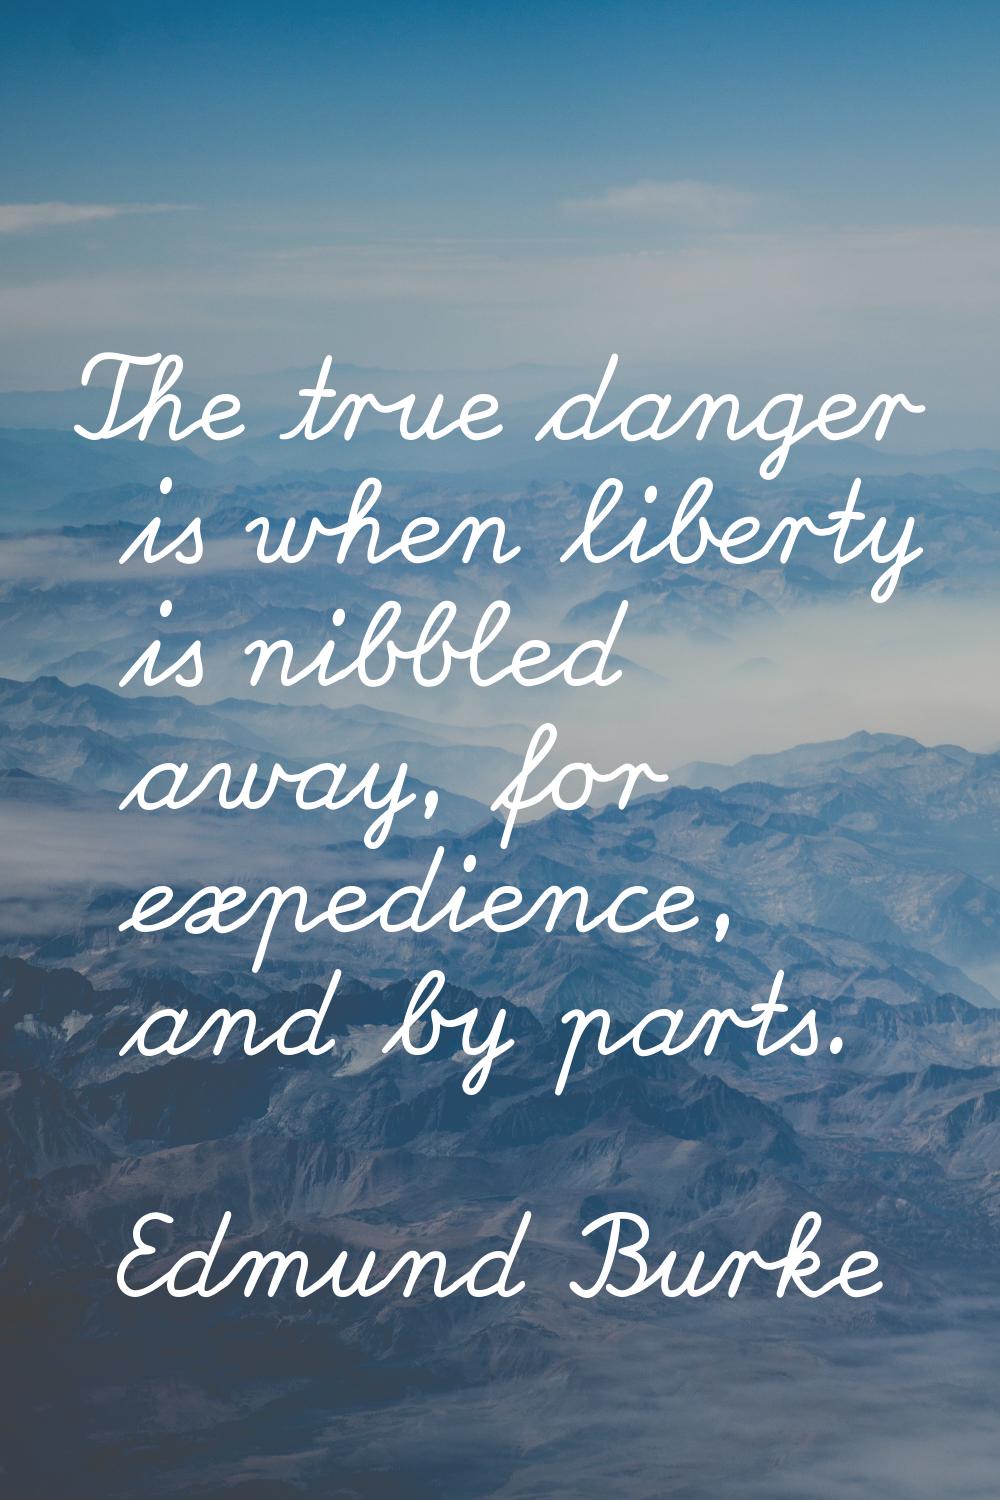 The true danger is when liberty is nibbled away, for expedience, and by parts.